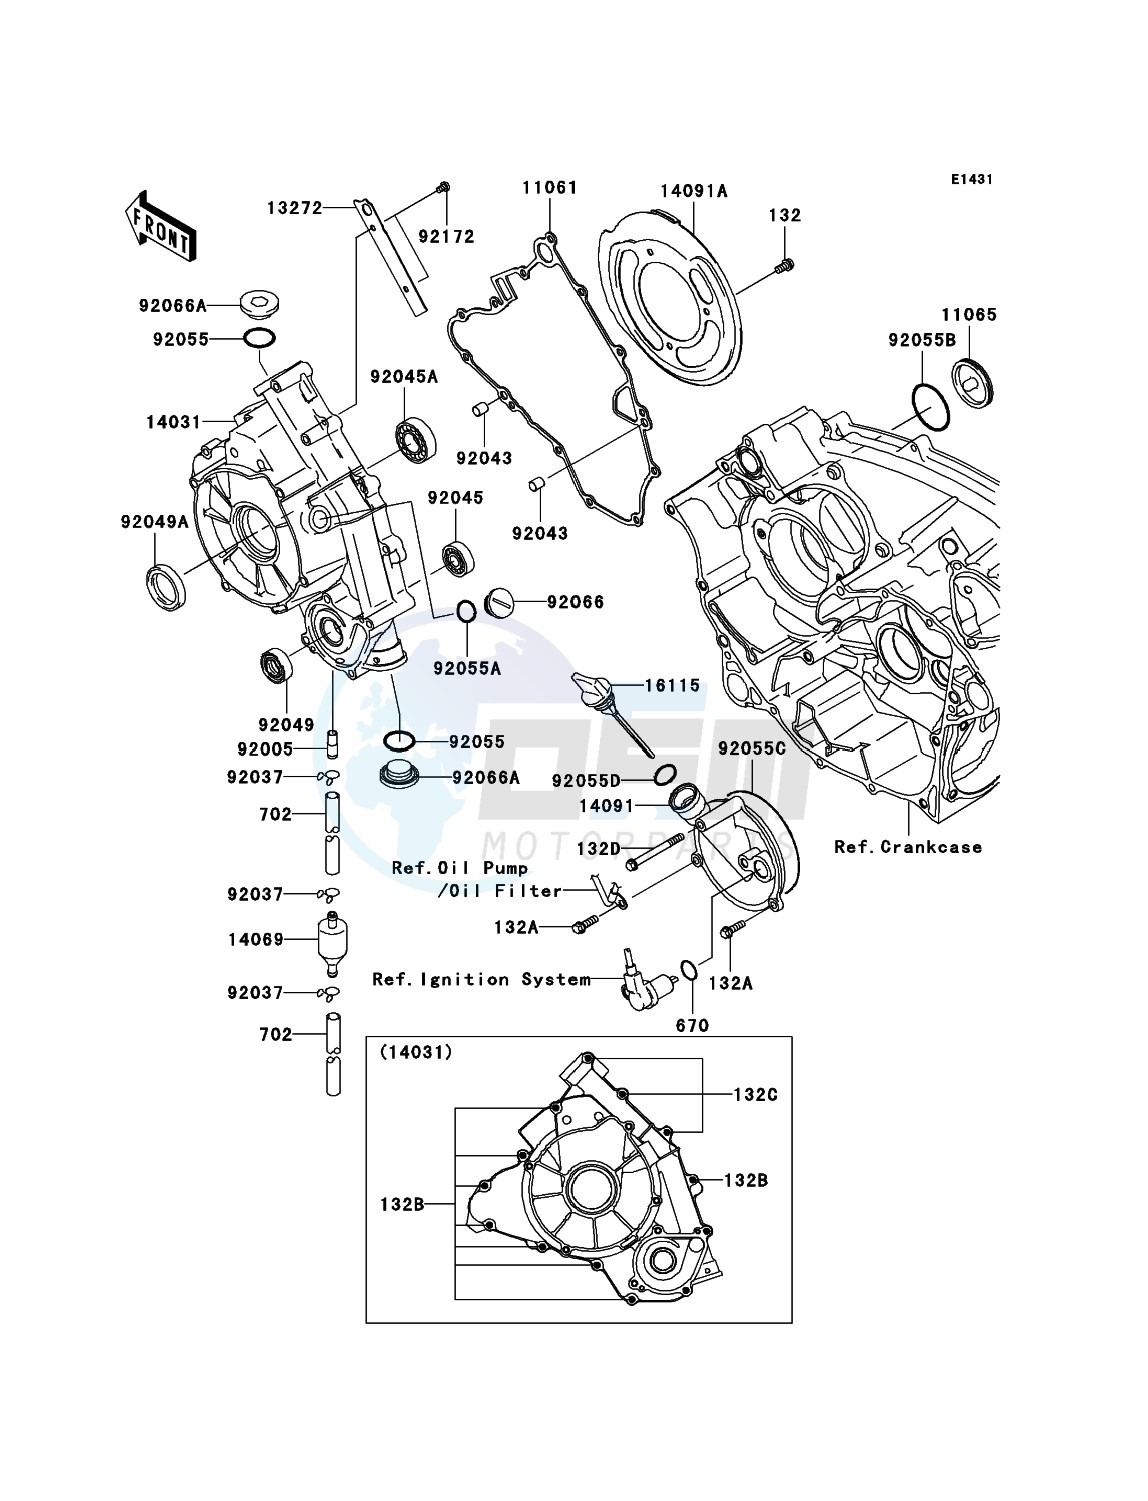 Engine Cover(s) image